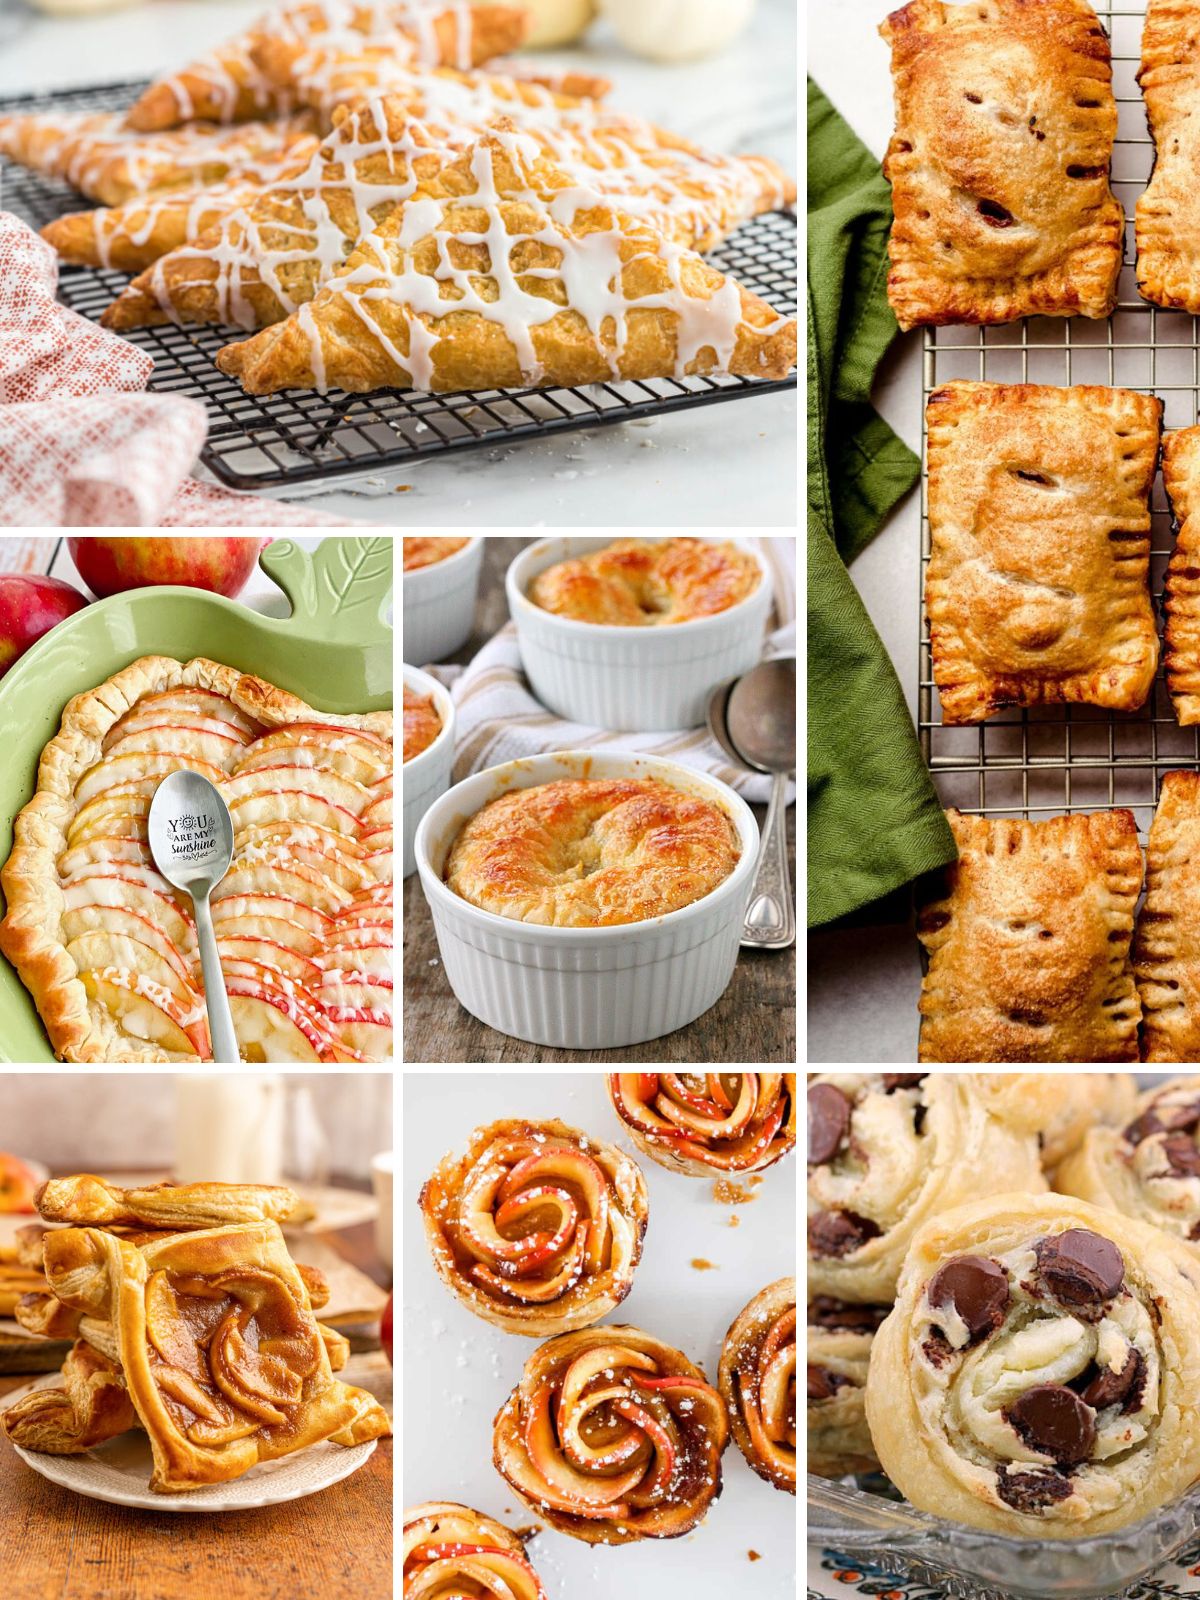 Recipes for Thanksgiving made with Puff Pastry.